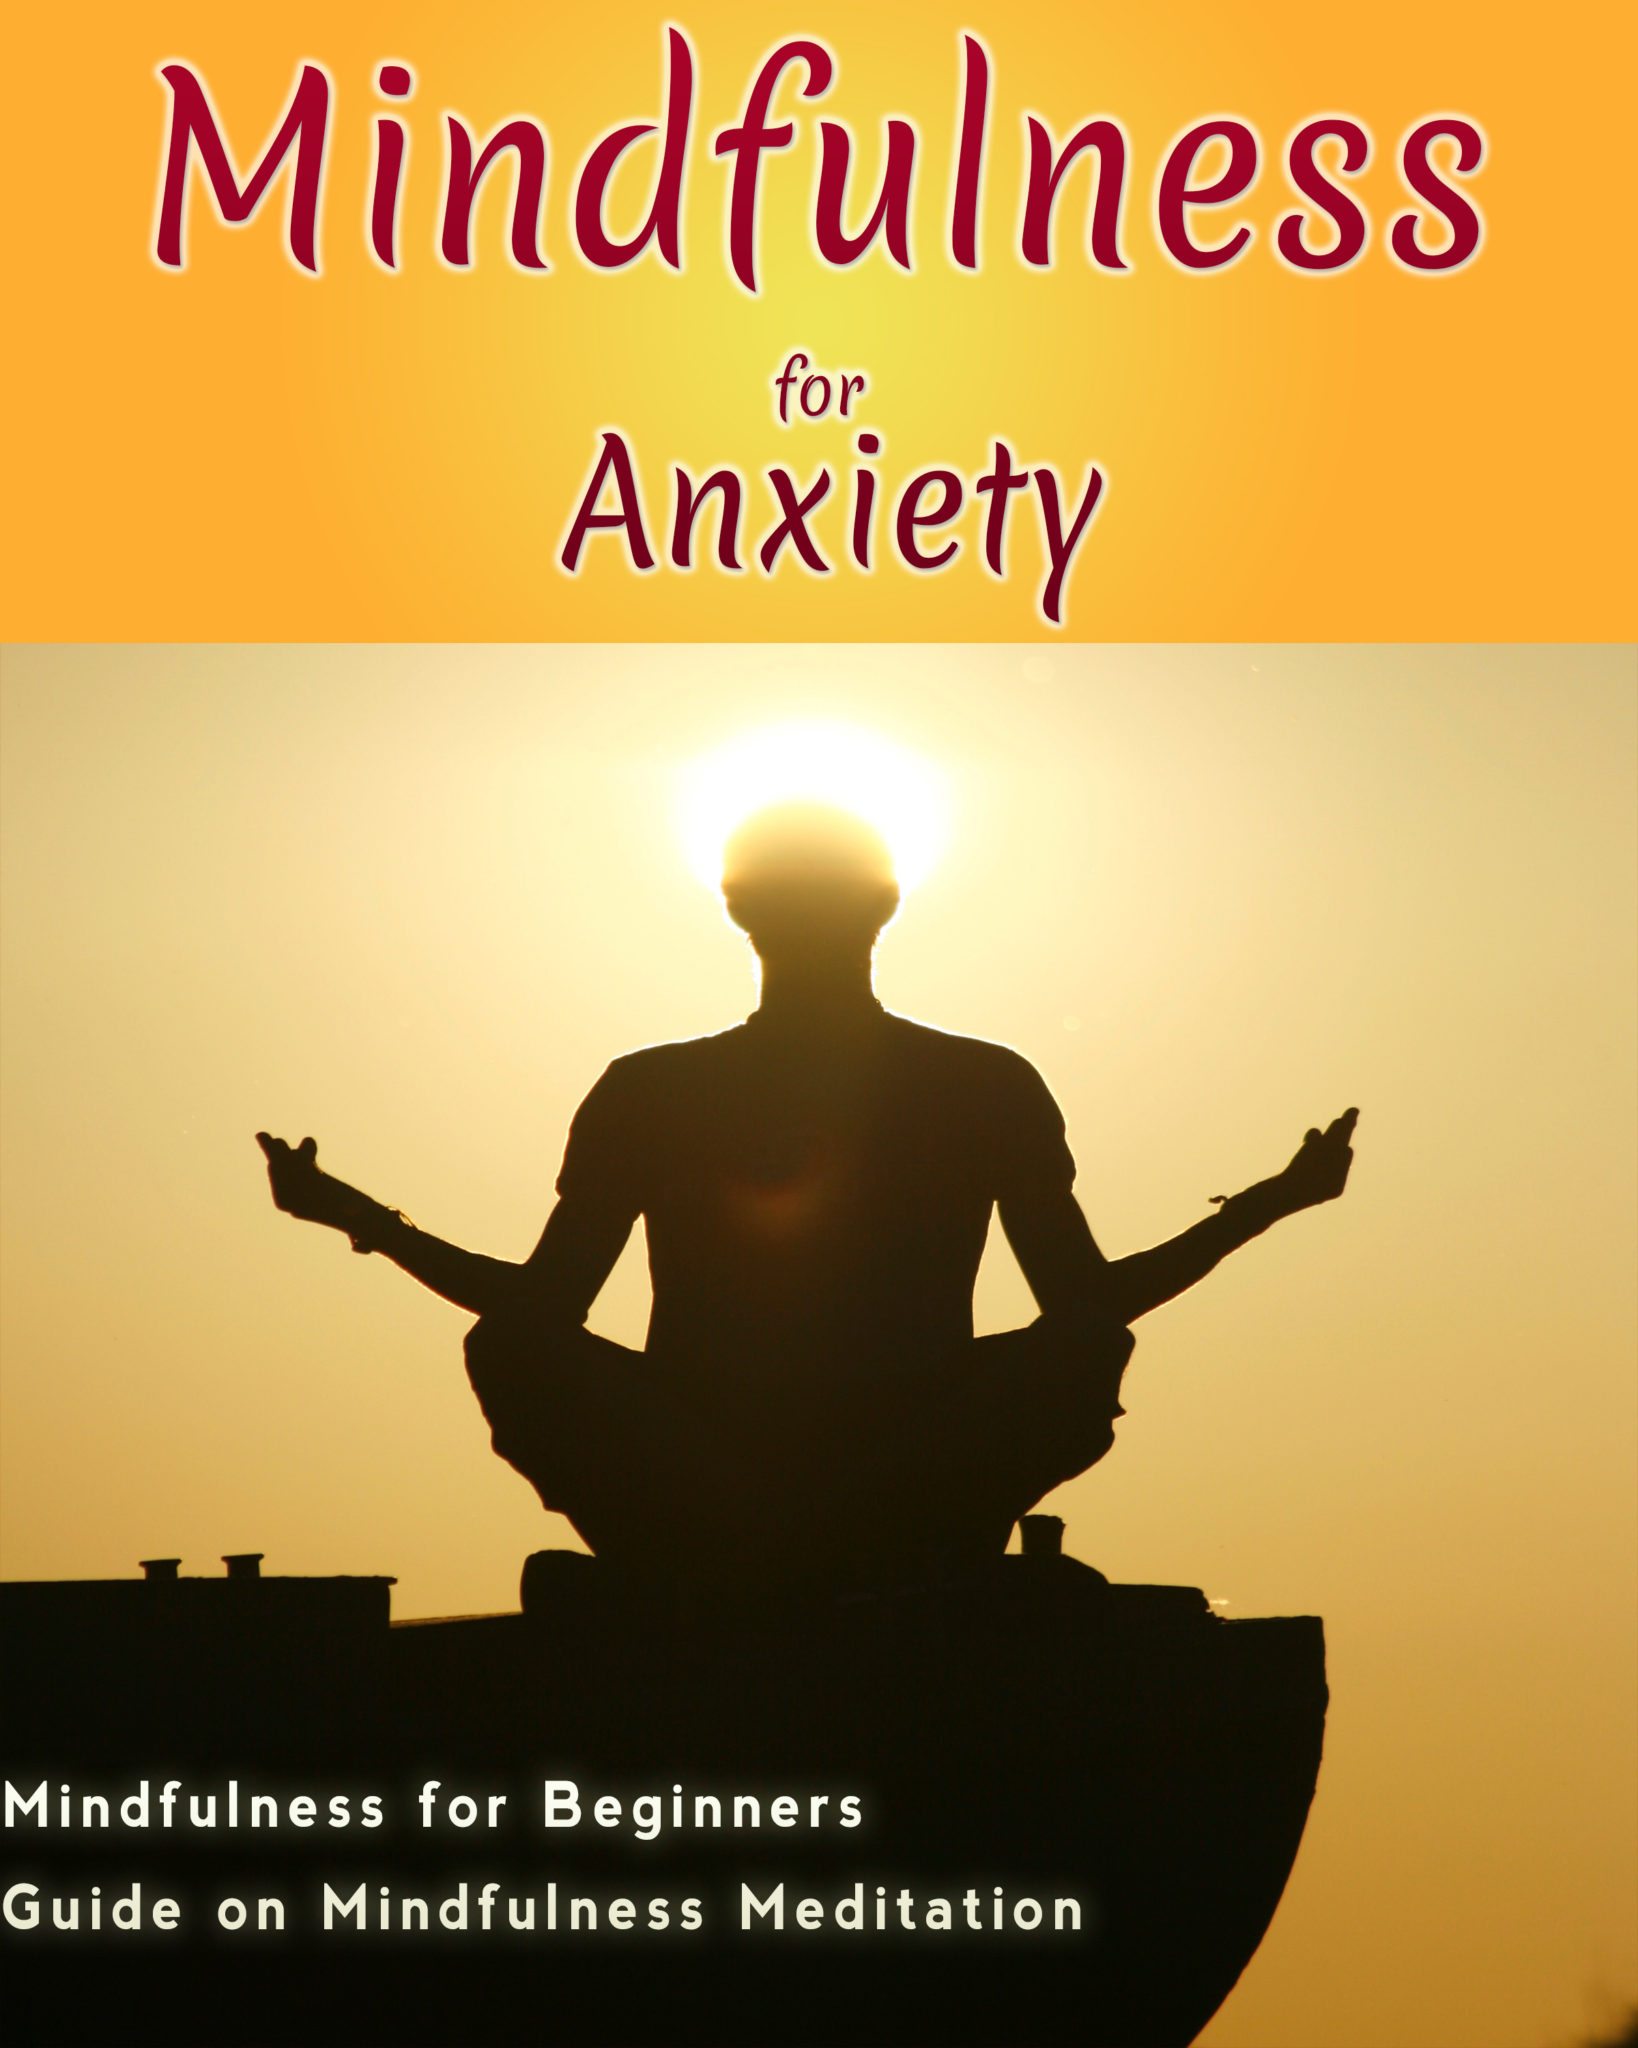 FREE: Mindfulness for Anxiety: Mindfulness for Beginners Guide on Mindfulness Meditation by Brent R